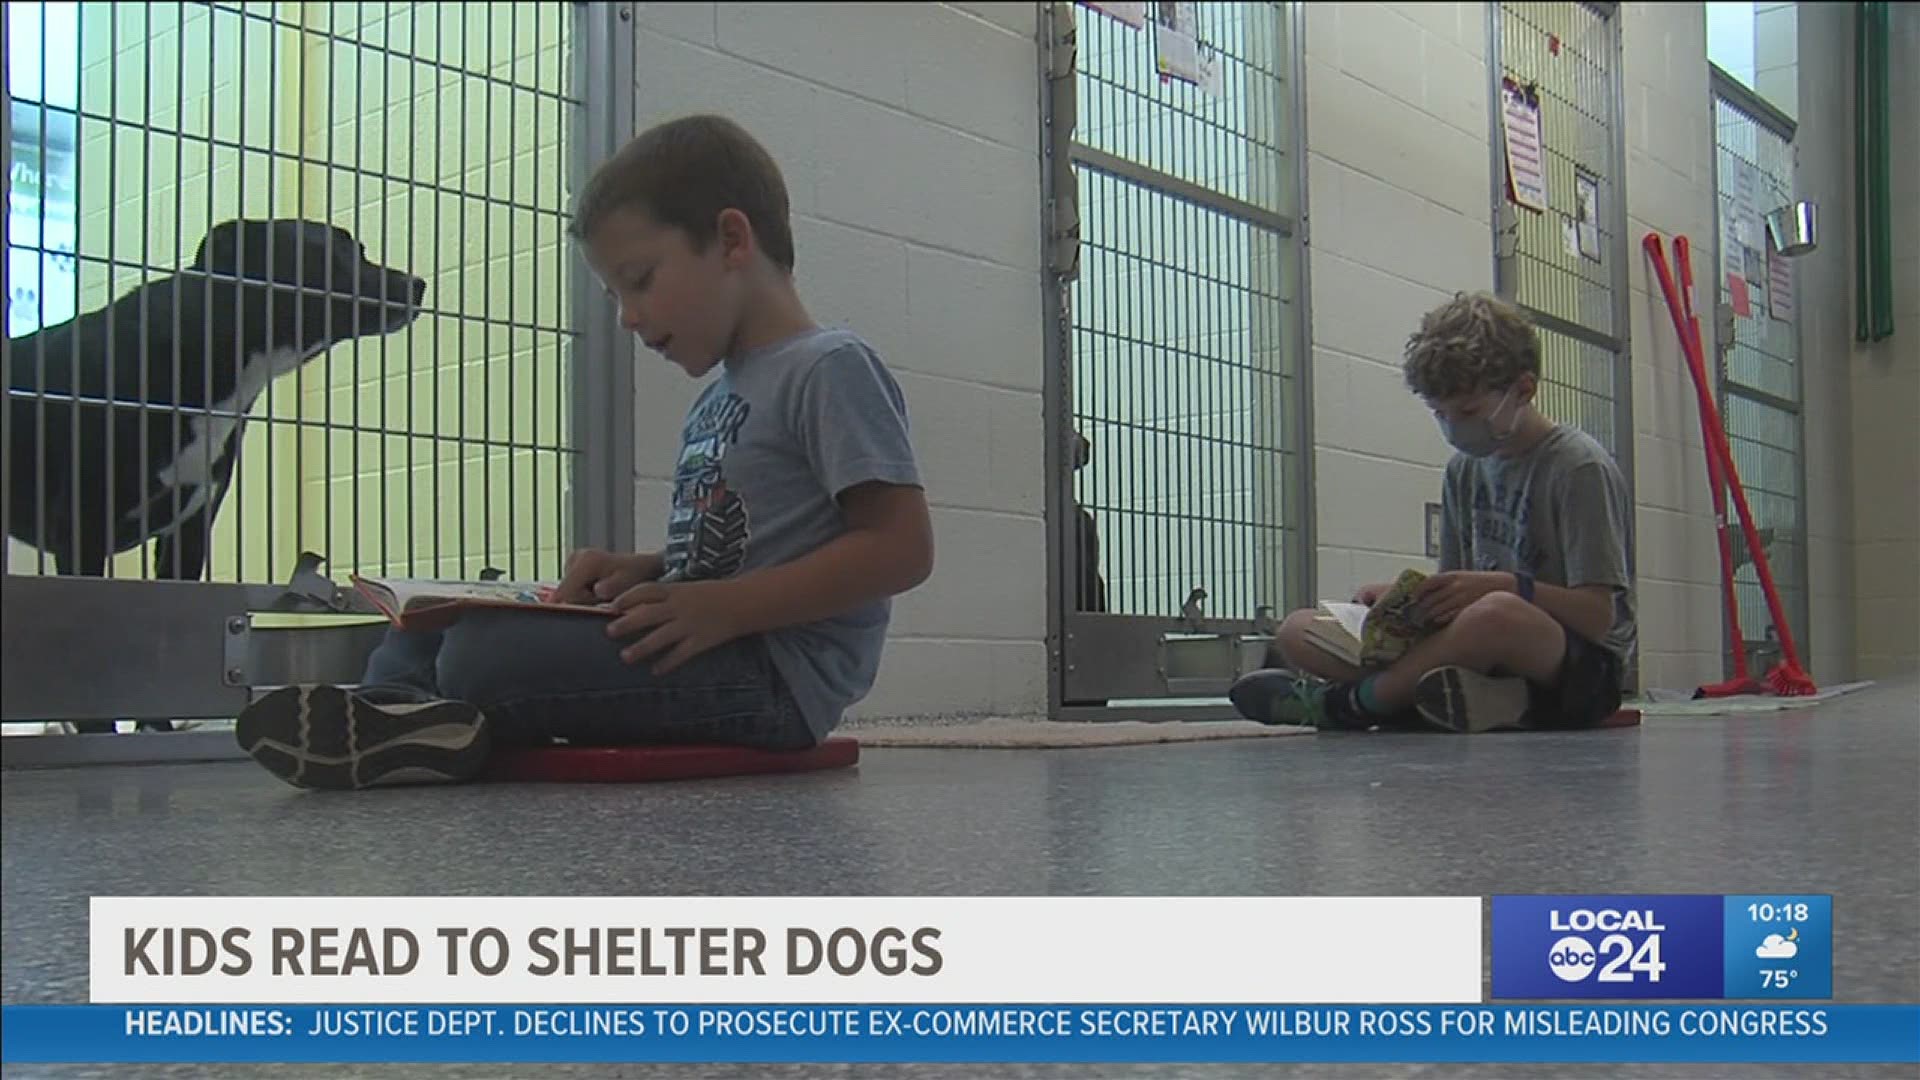 So sweet seeing kids helping in their community animal shelter |  